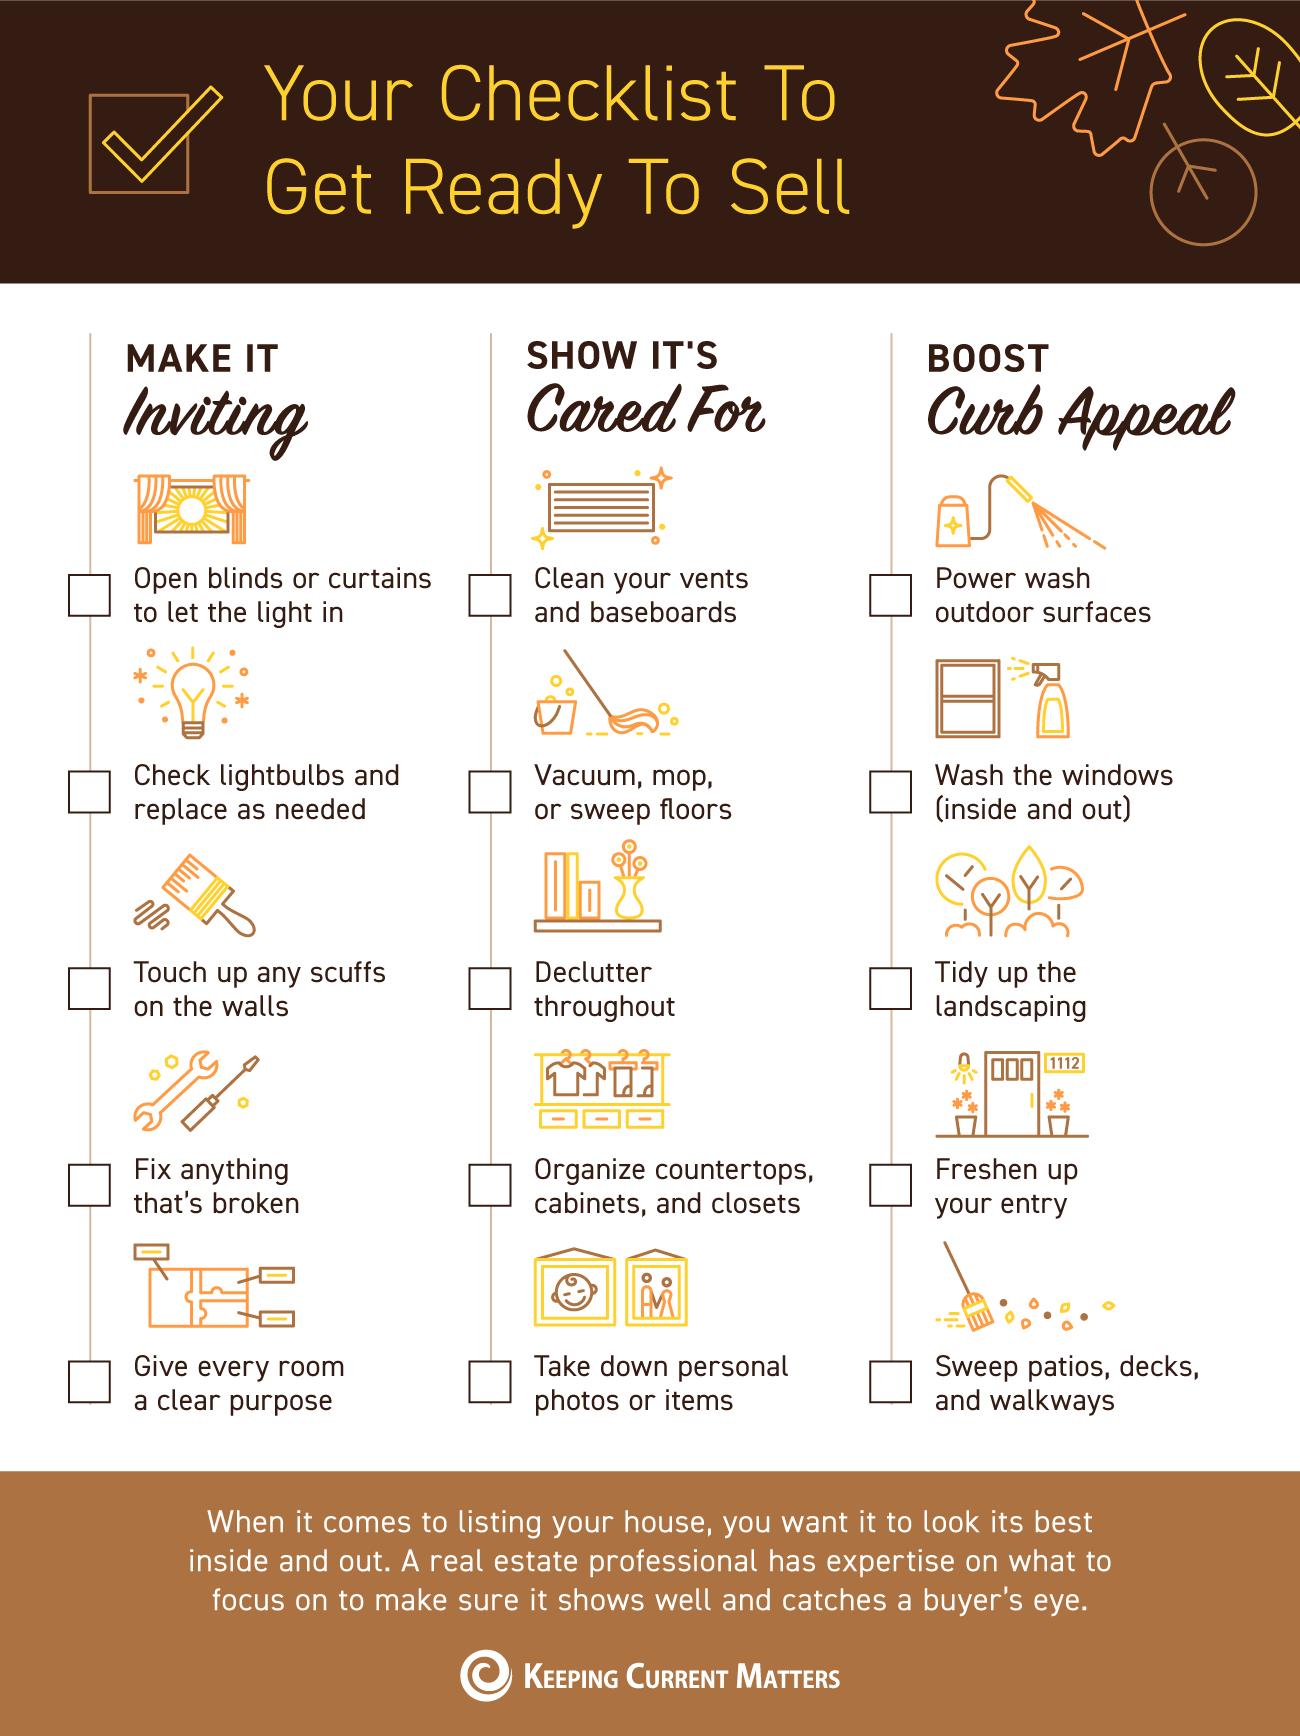 Your Checklist To Get Ready To Sell [INFOGRAPHIC] | Keeping Current Matters